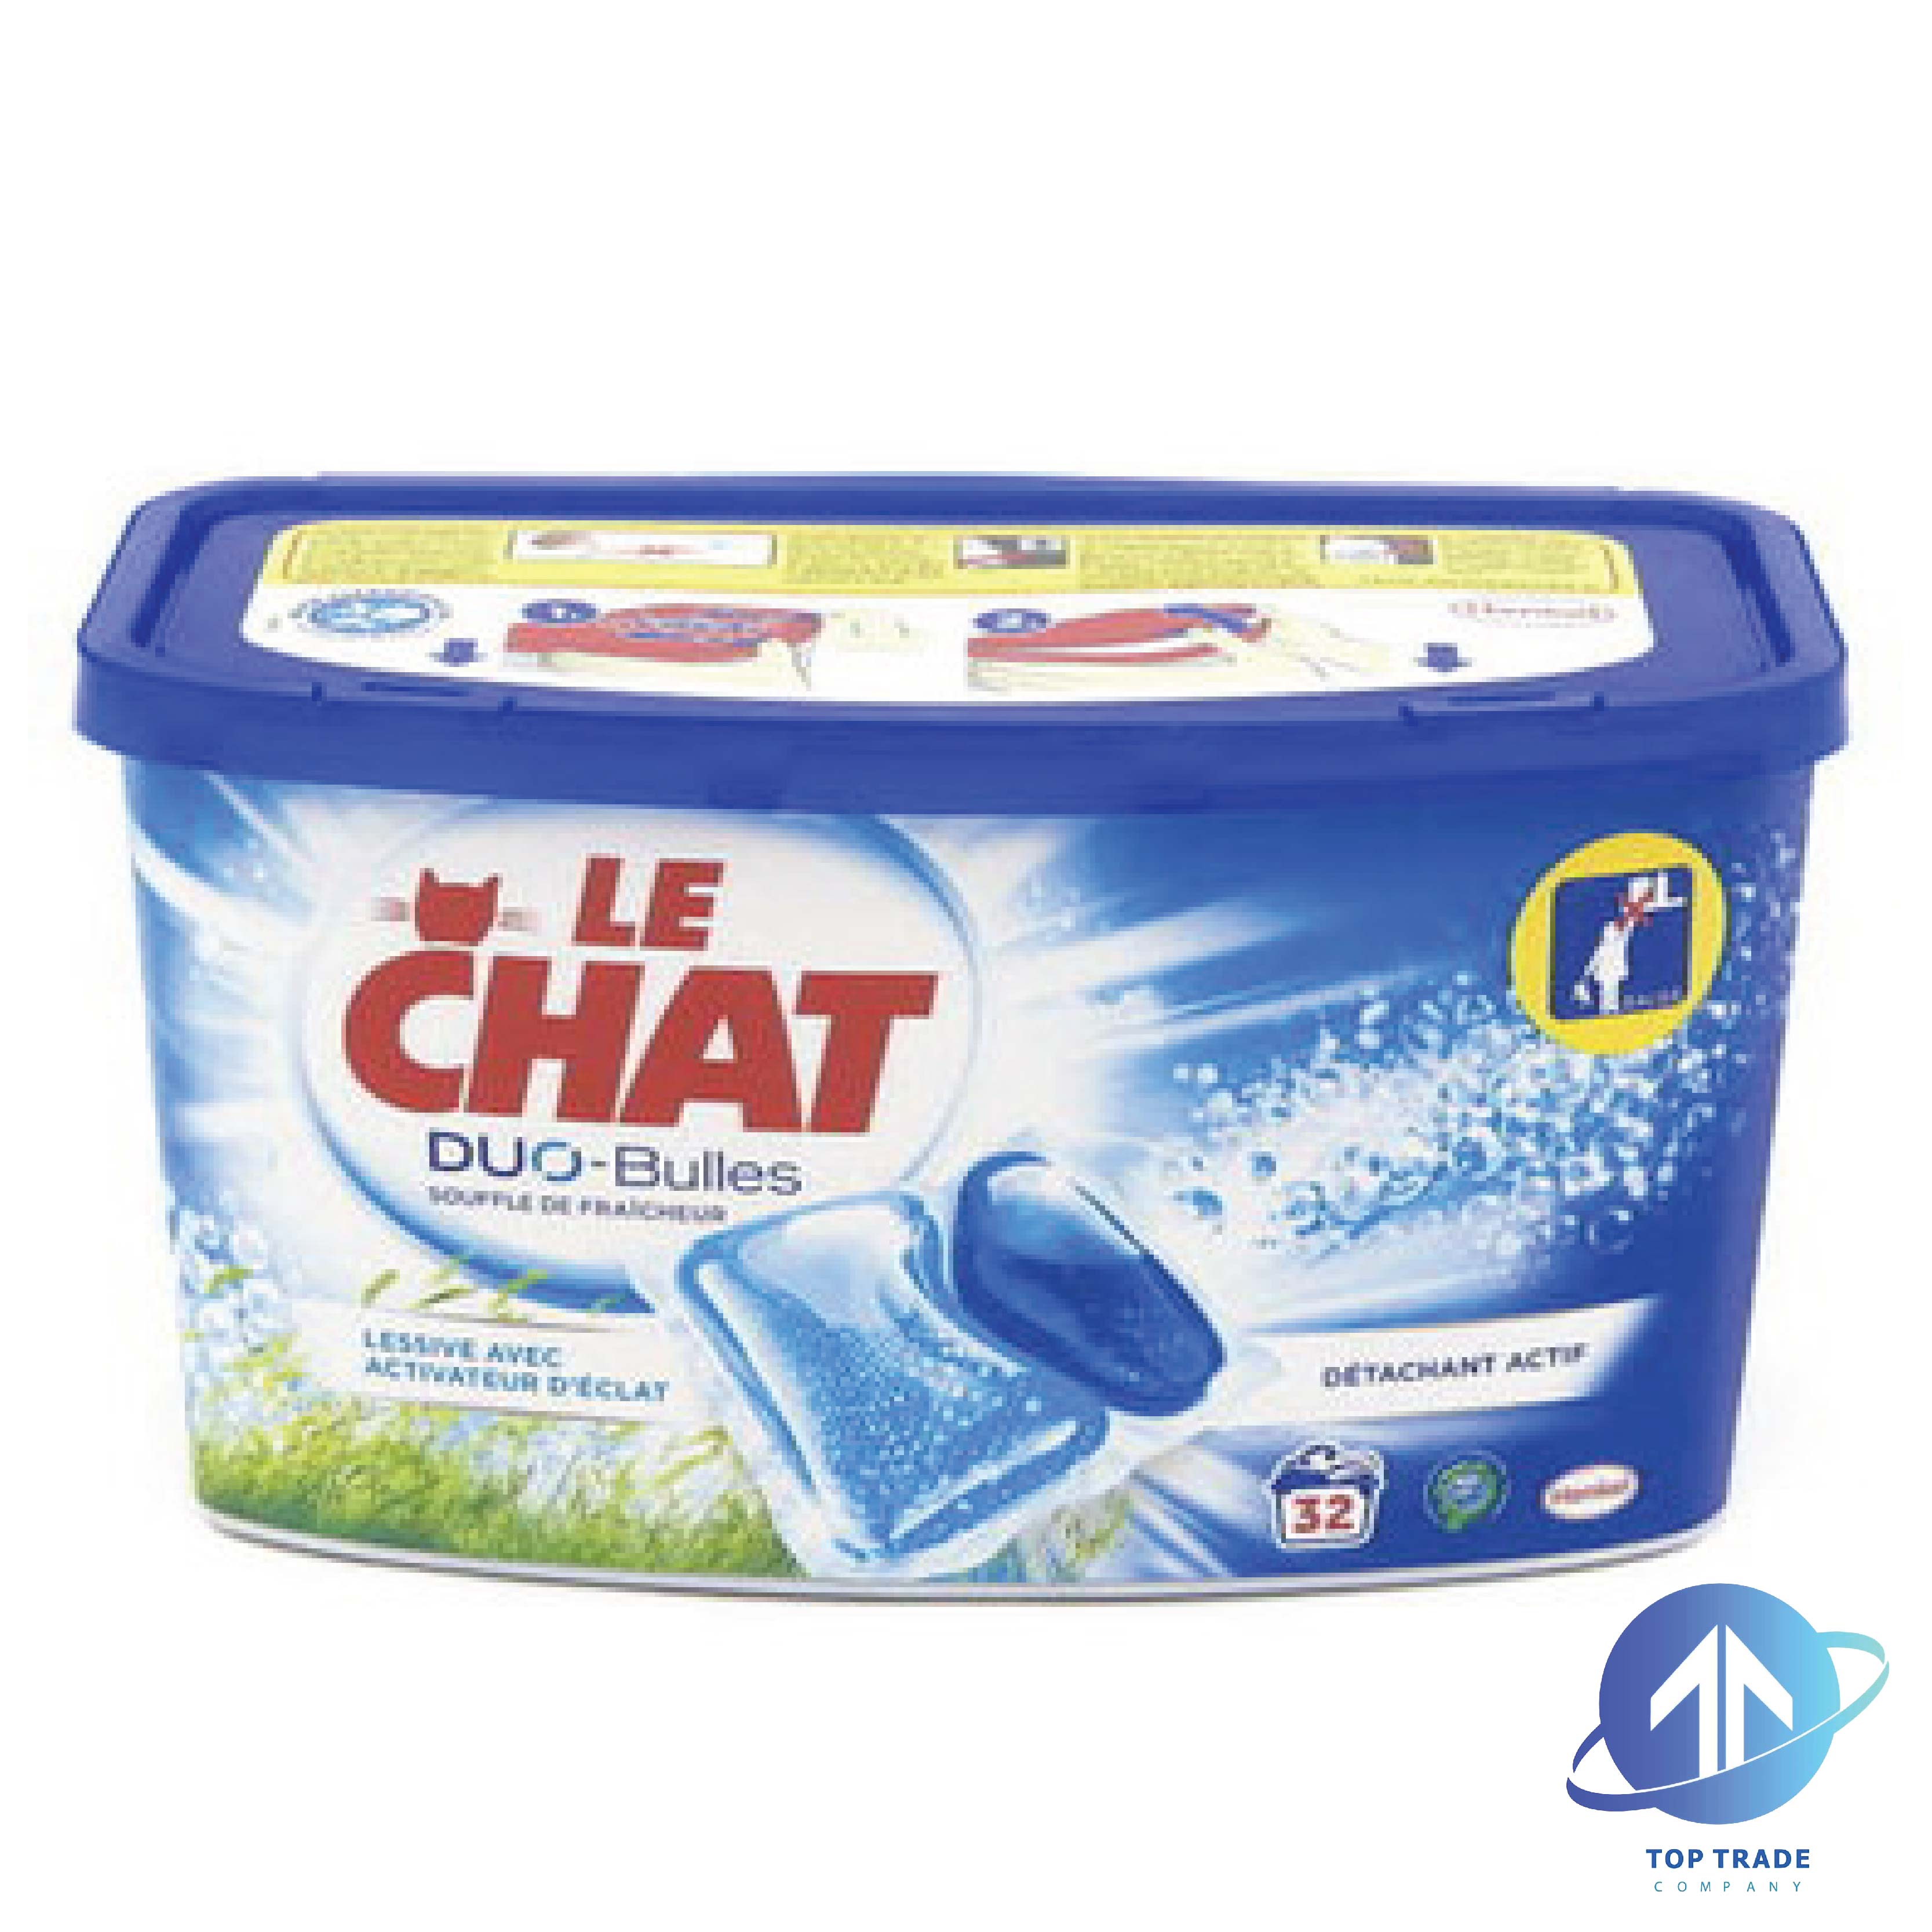 Le Chat caps duo bubble with a touch of freshness 32pcs